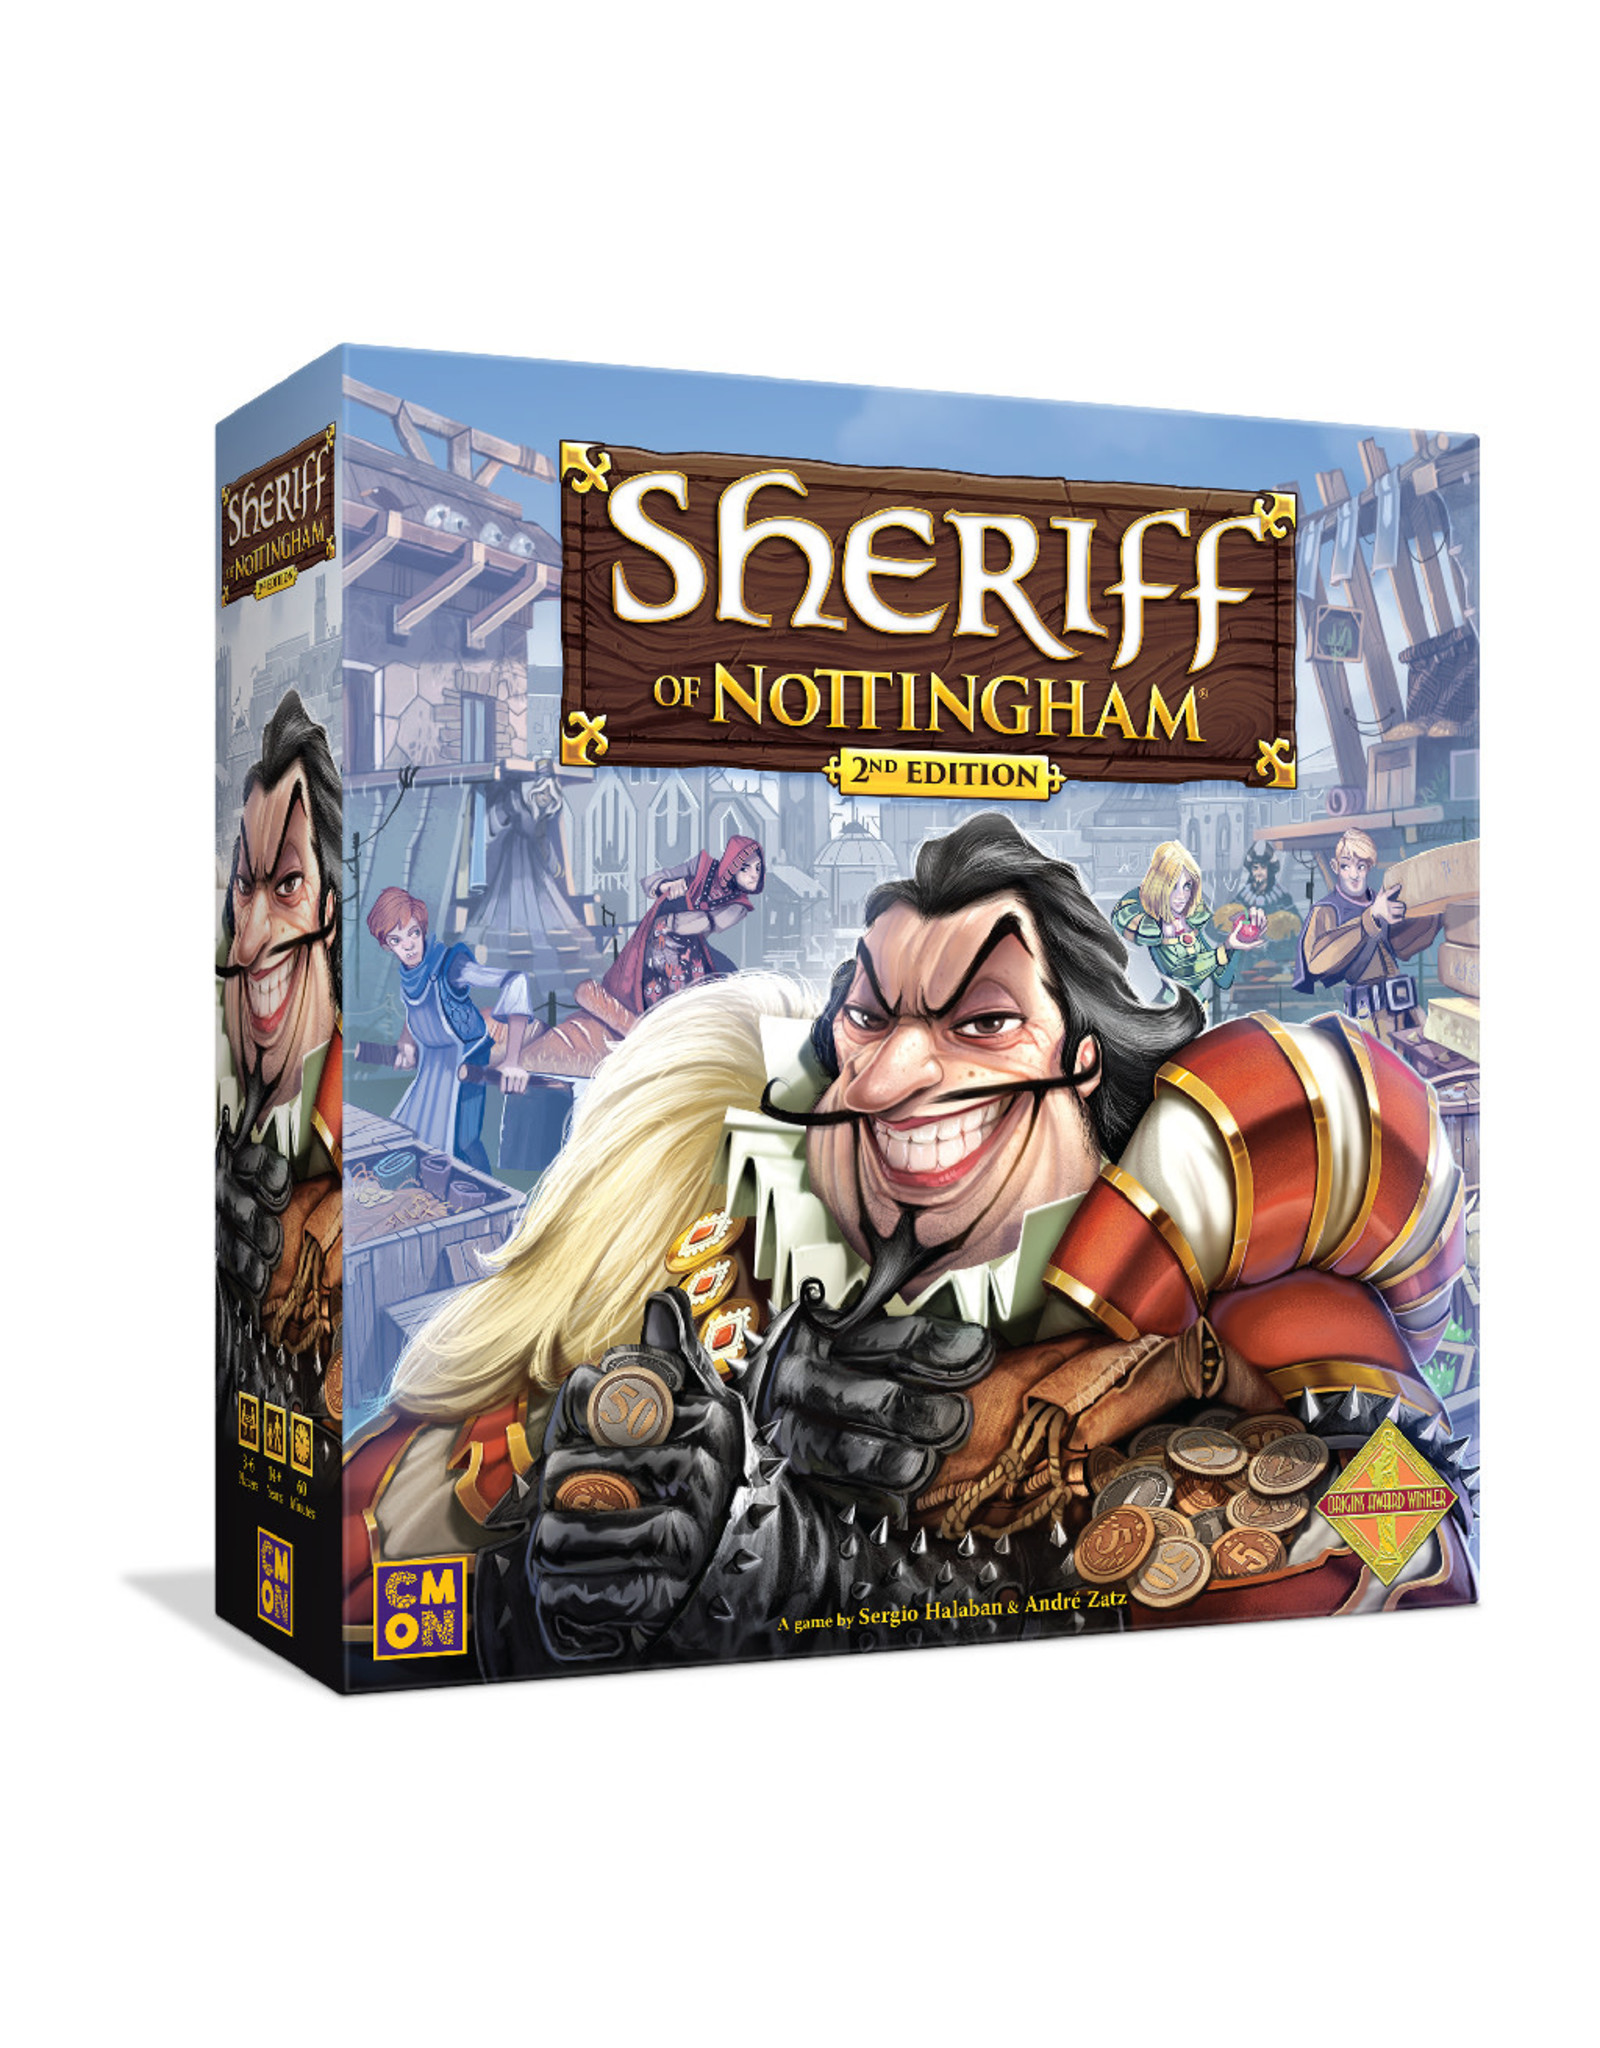 CLEARANCE Sherriff of Nottingham 2nd Edition